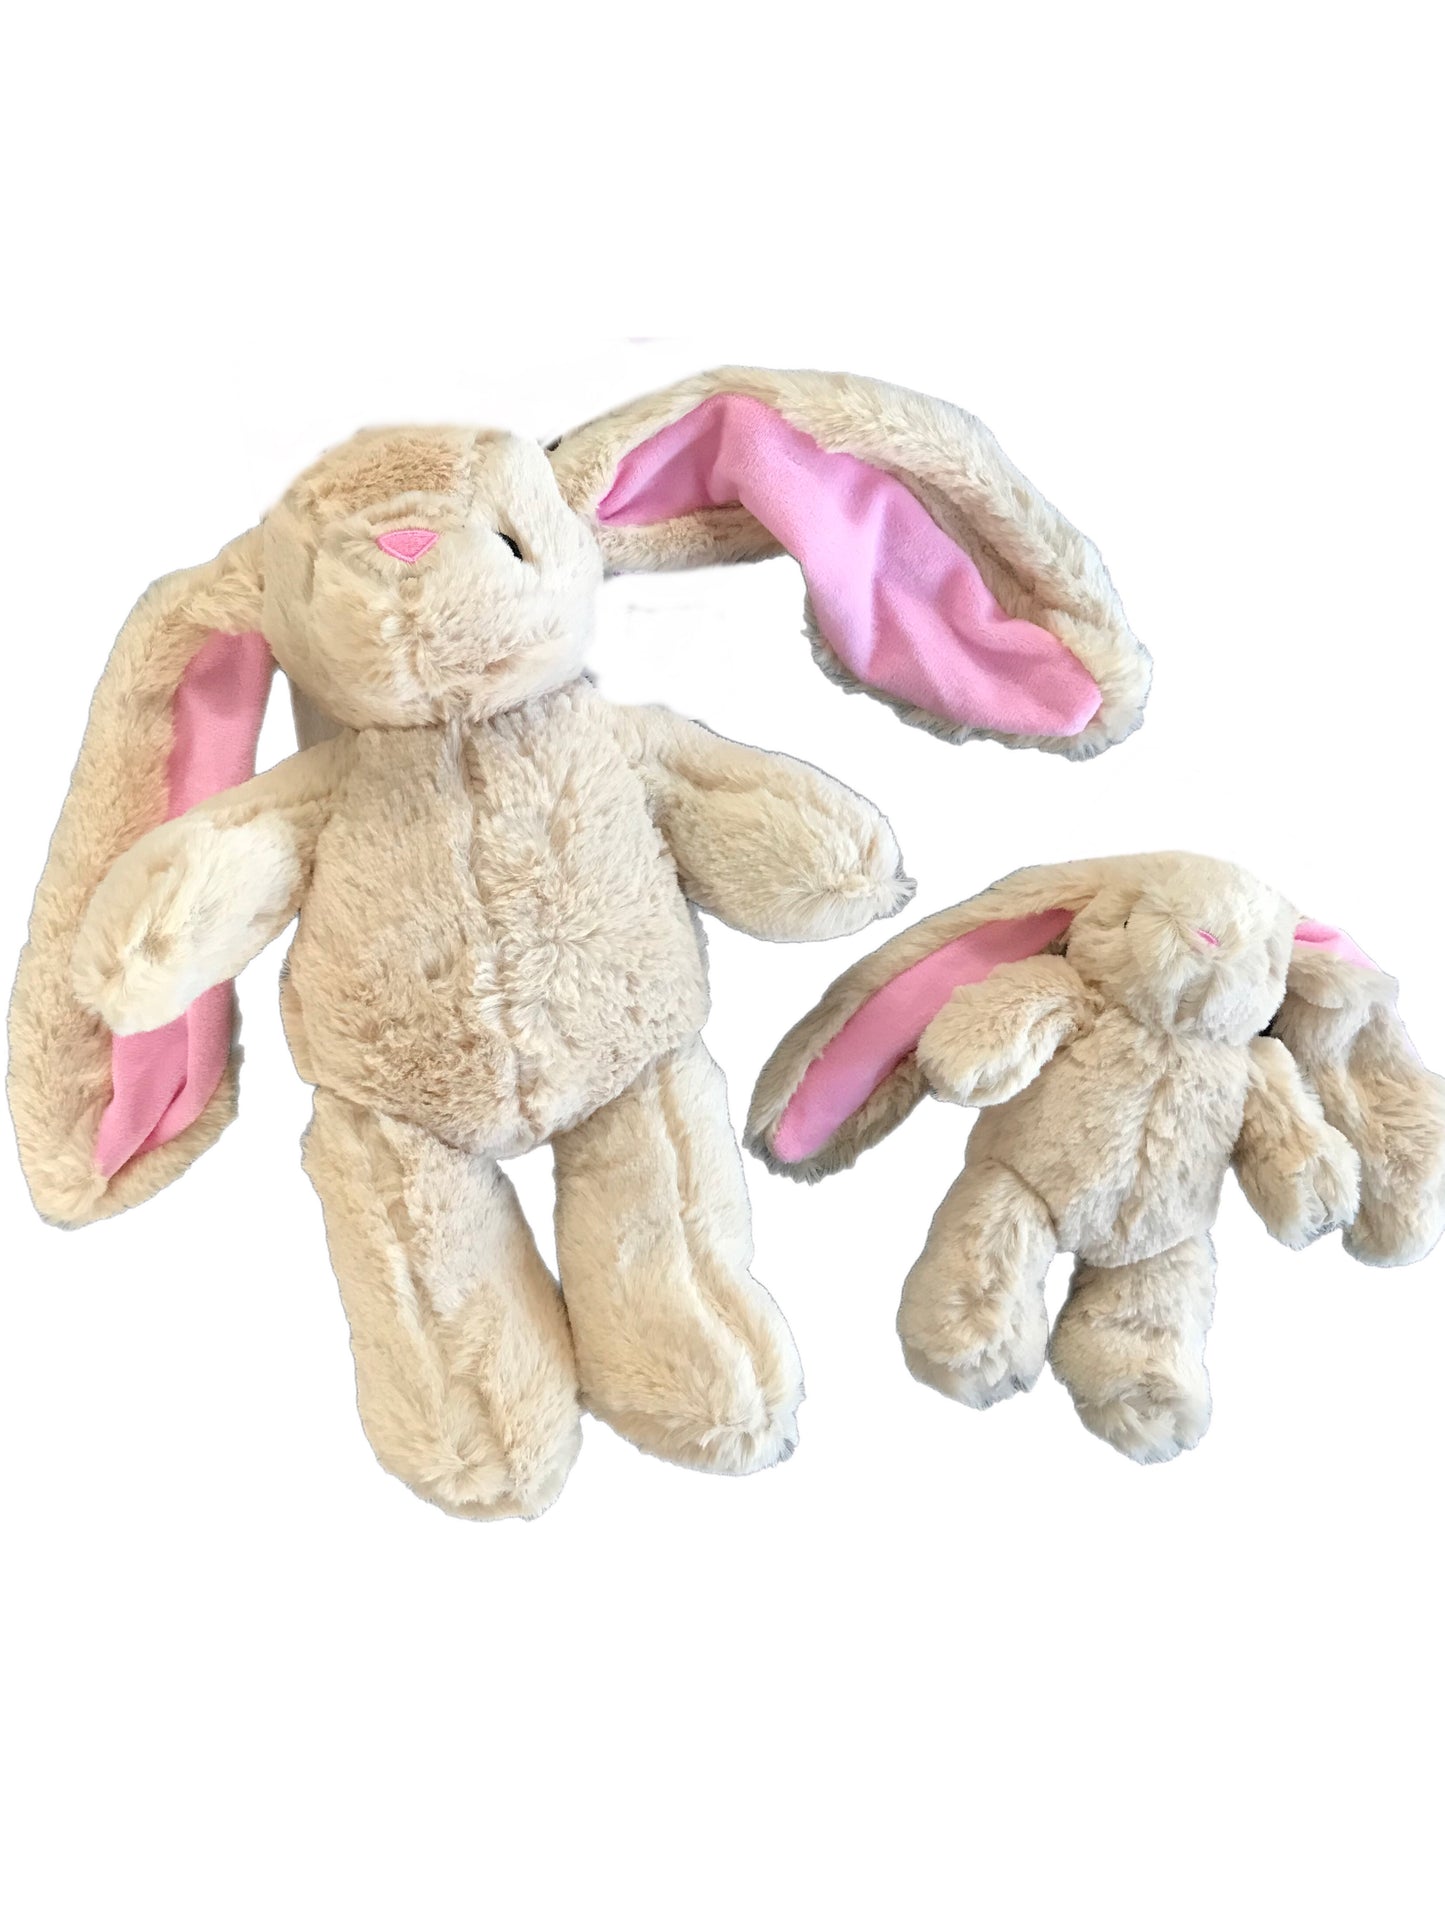 Long eared floppy rabbit plush toy with squeaker